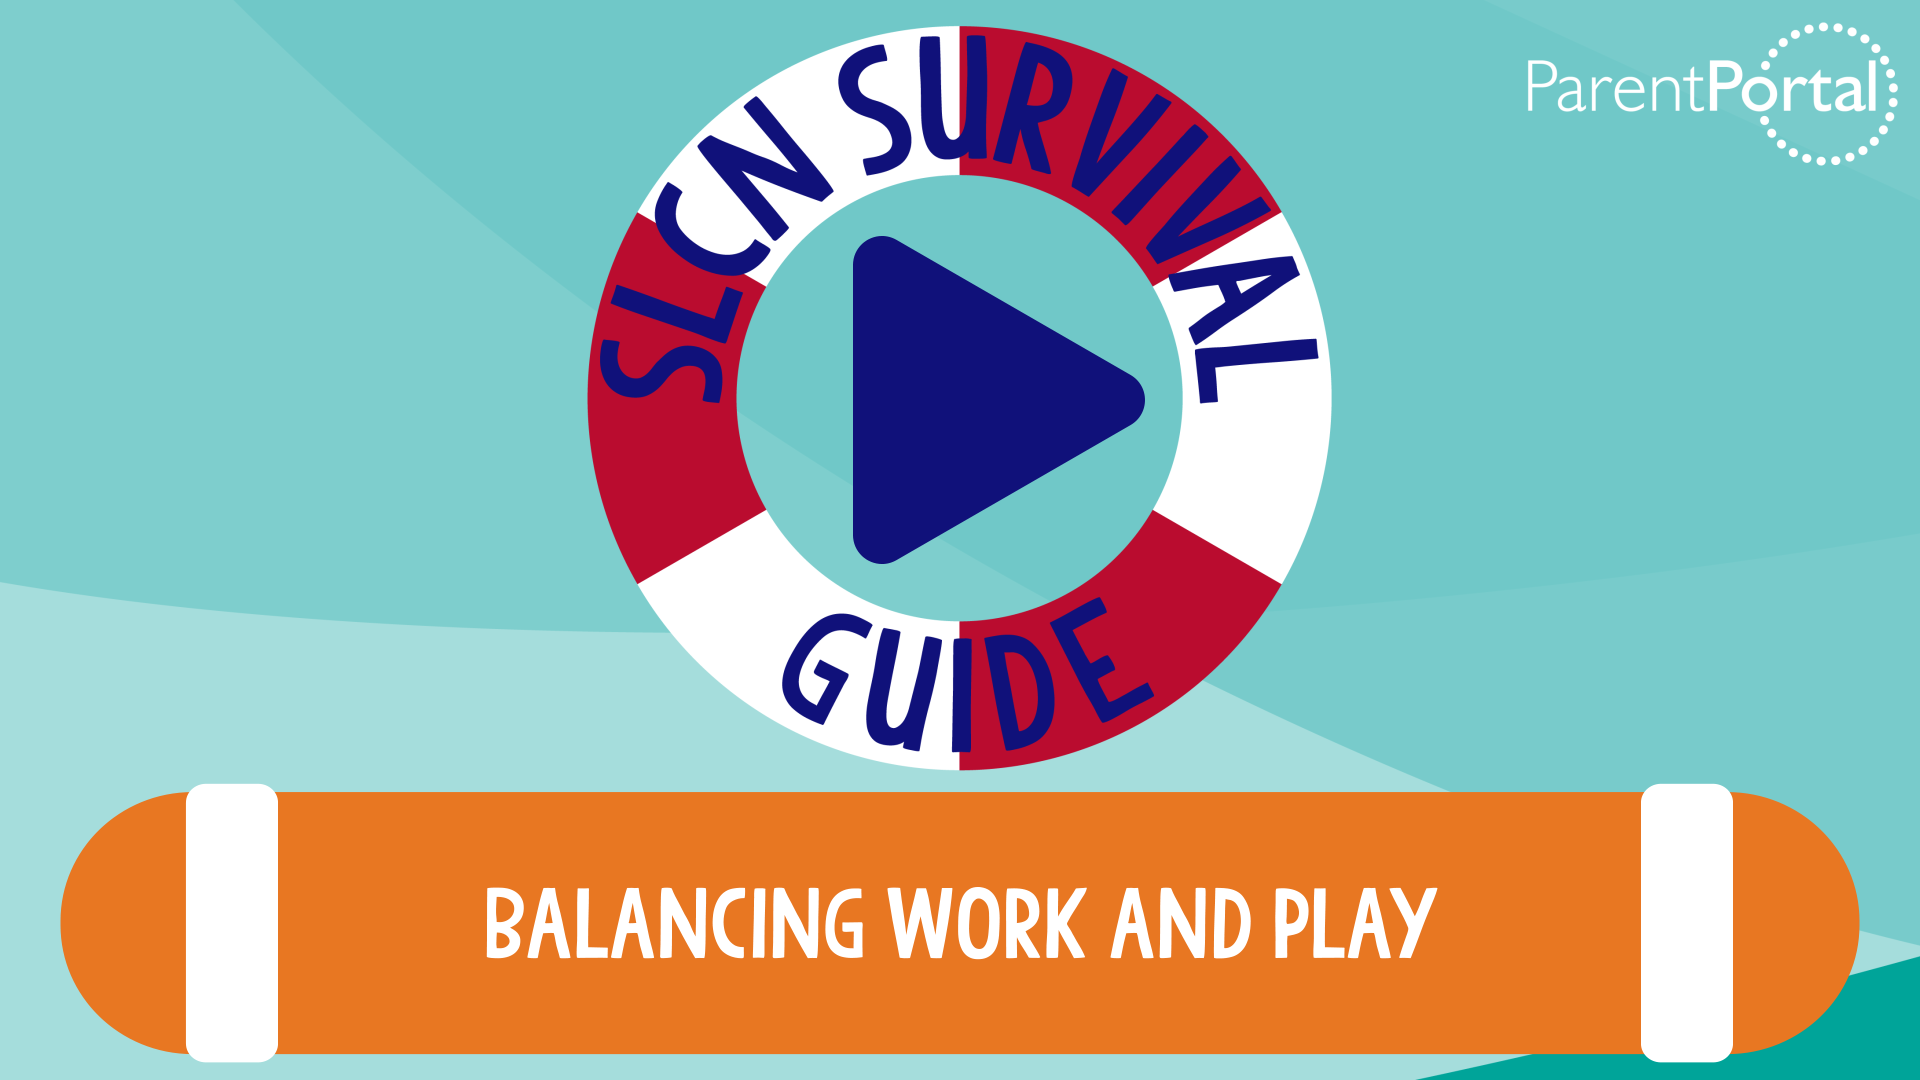 SLCN Survival Guide 2 - Balancing Work and Play Video